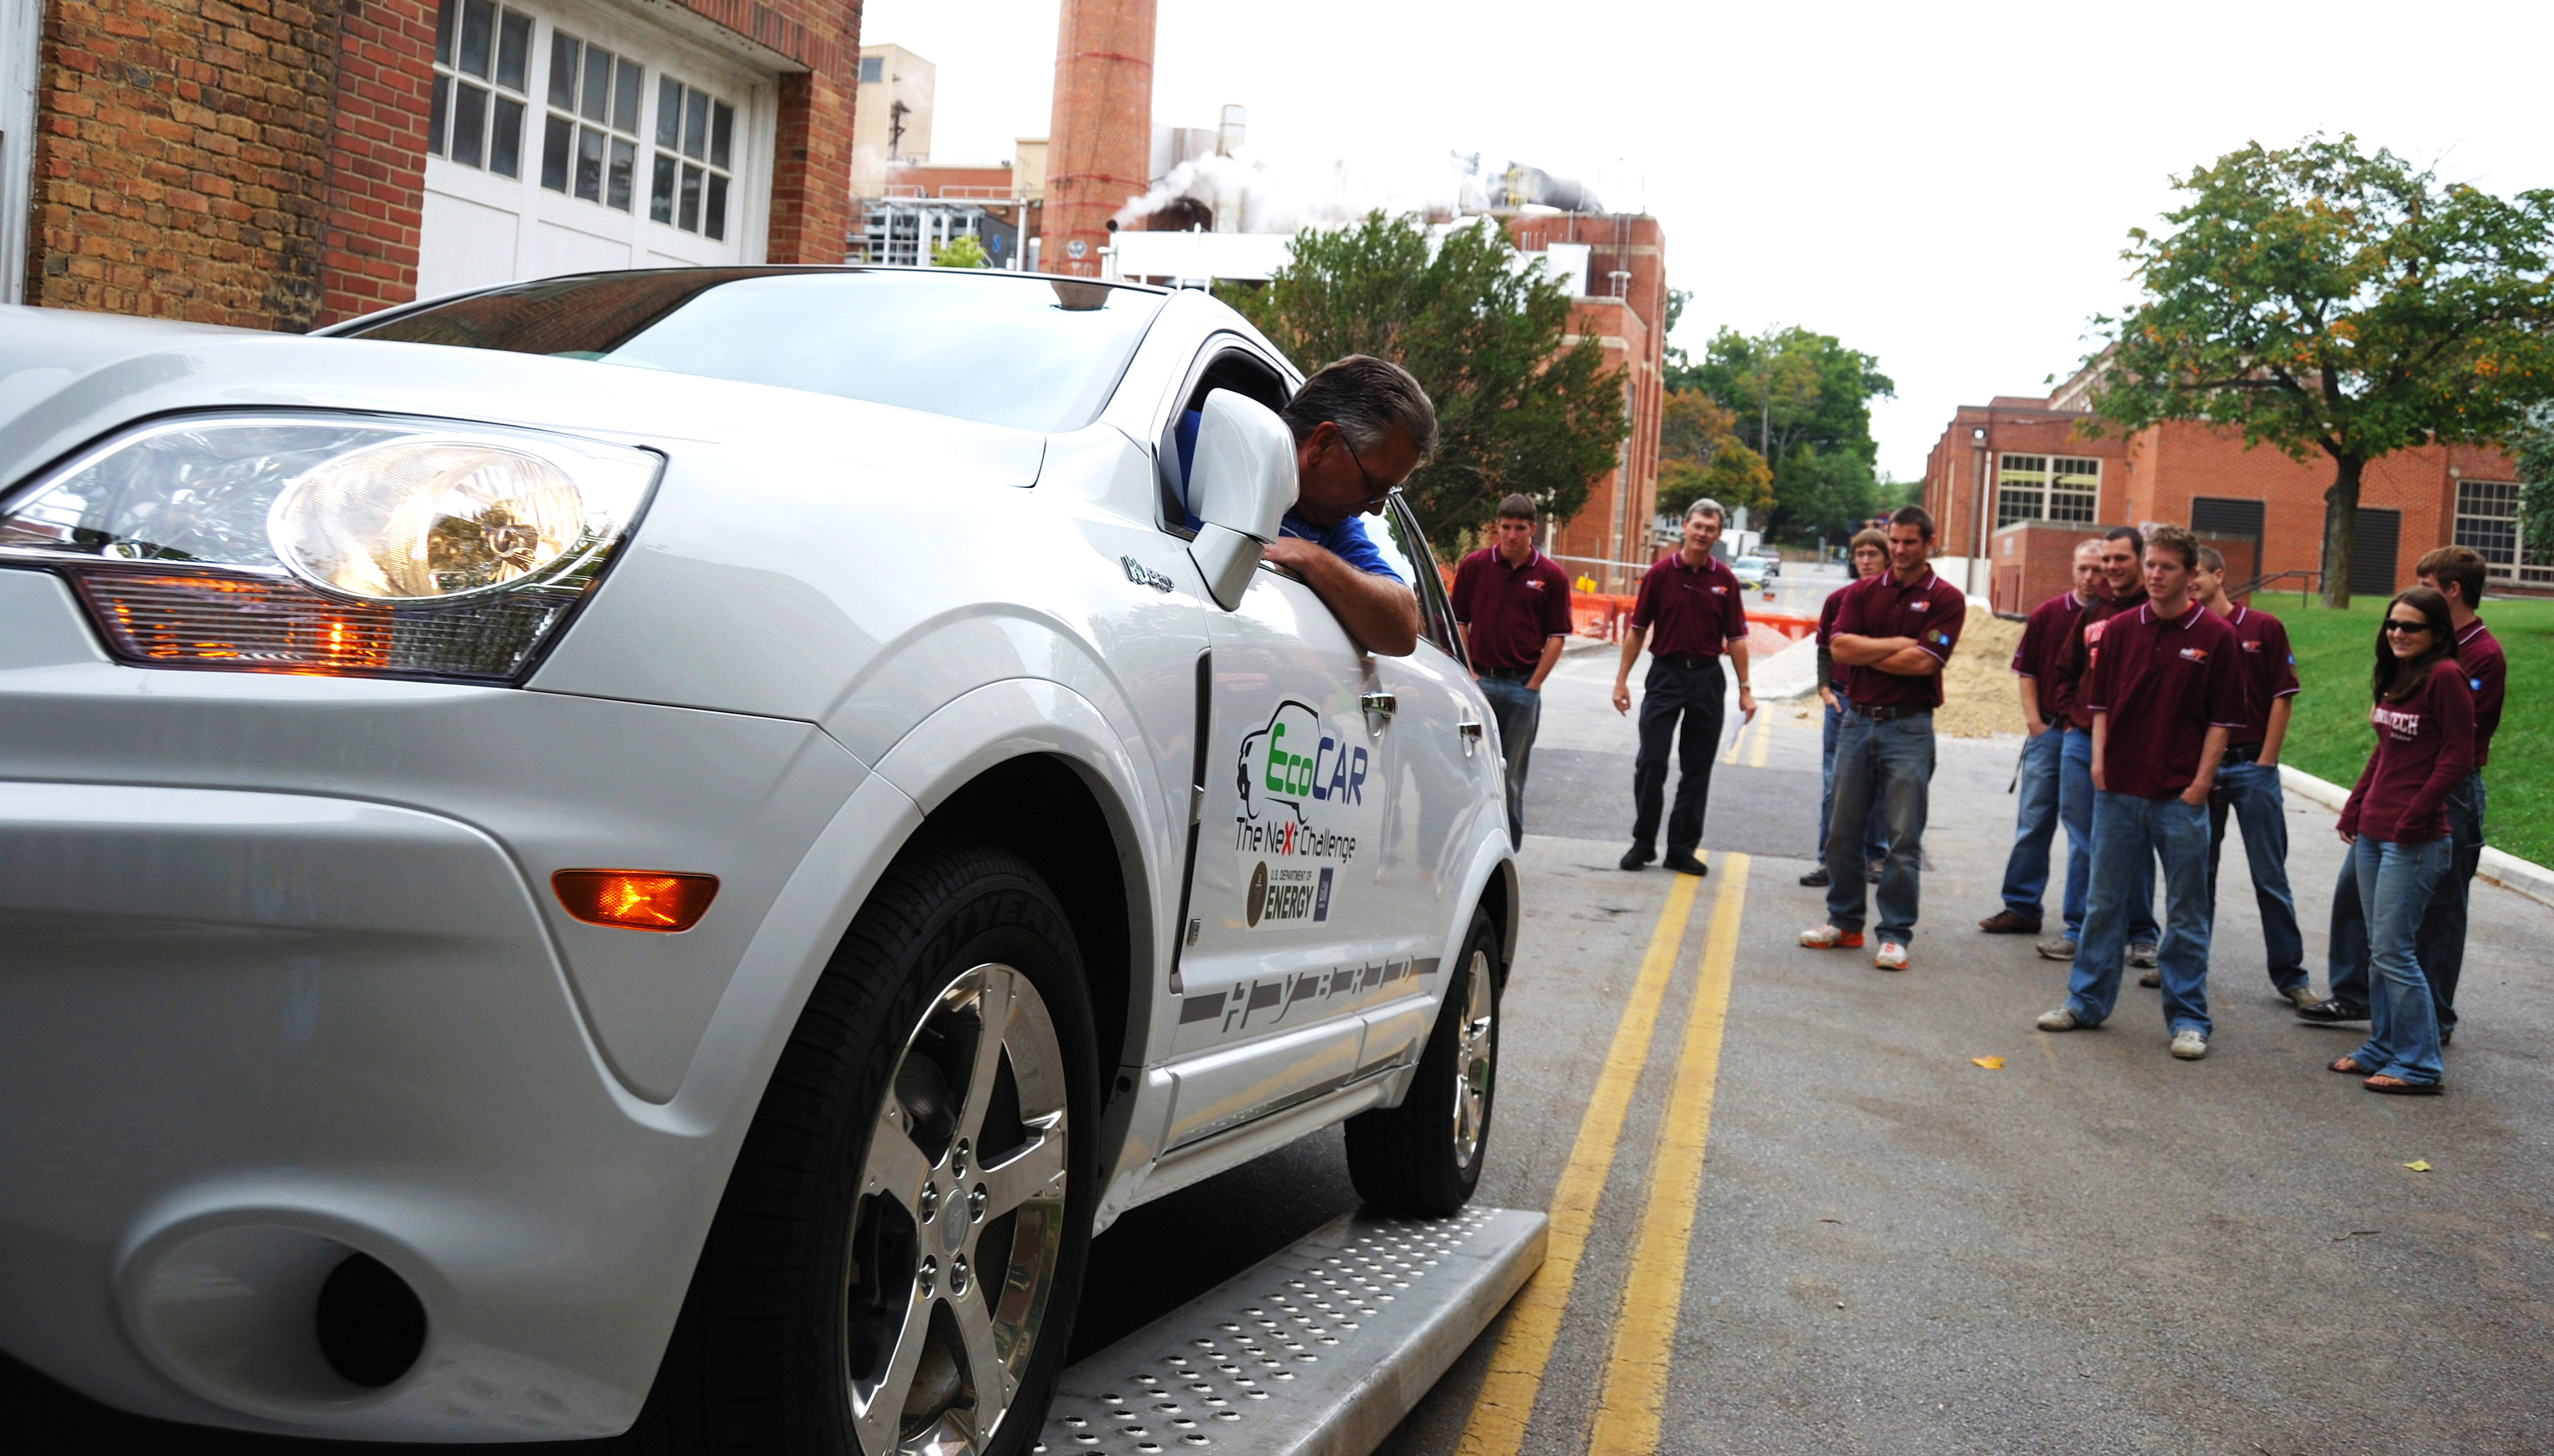 The 2009-10 Hybrid Electric Vehicle Team of Virginia Tech (HEVT) witness delivery of a 2009 crossover SUV donated by General Motors. As part of the EcoCAR Challenge, the team will re-engineer the car to use less fuel per mile and cut emissions. Among those in the background is Doug Nelson, a Virginia Tech professor of mechanical engineering the faculty adviser for the EcoCAR Challenge competition.